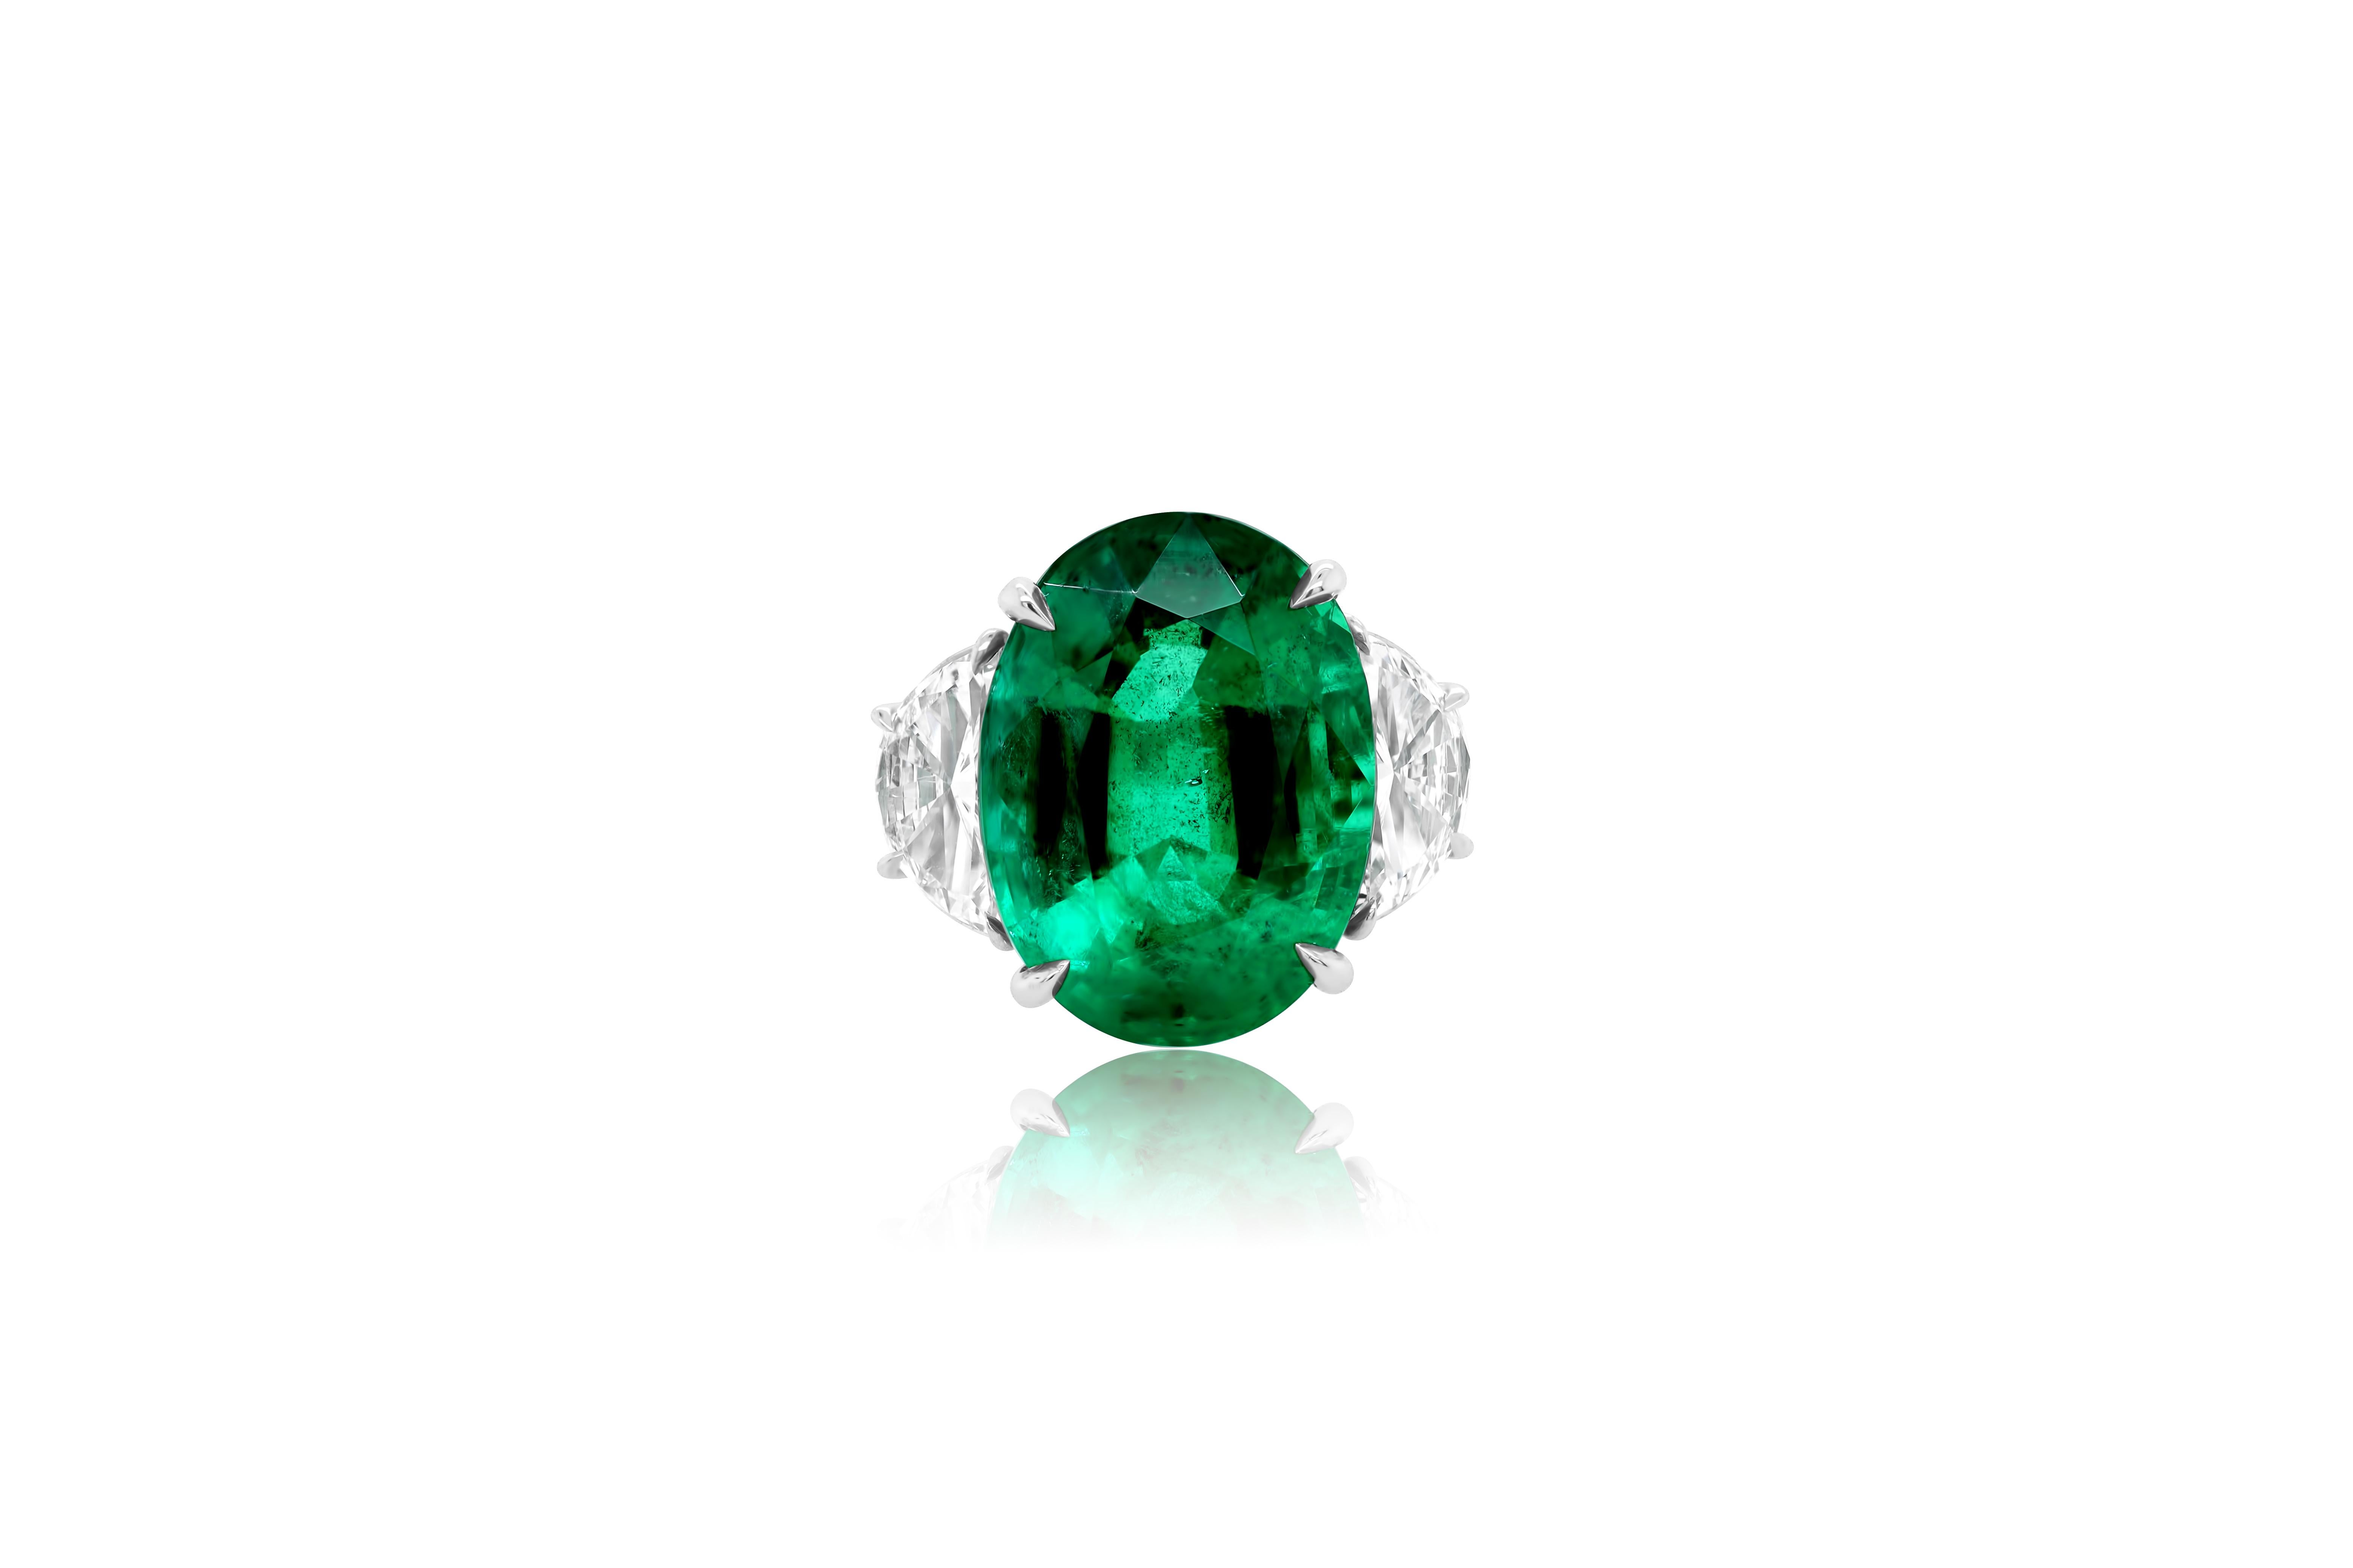 Platinum emerald and diamond ring featuring a center 13.50 ct oval cut emerald with 2  half moon shaped diamonds on the side totaling 2.50 cts of diamonds (C.Dunaigre certified).
Diana M. is a leading supplier of top-quality fine jewelry for over 35